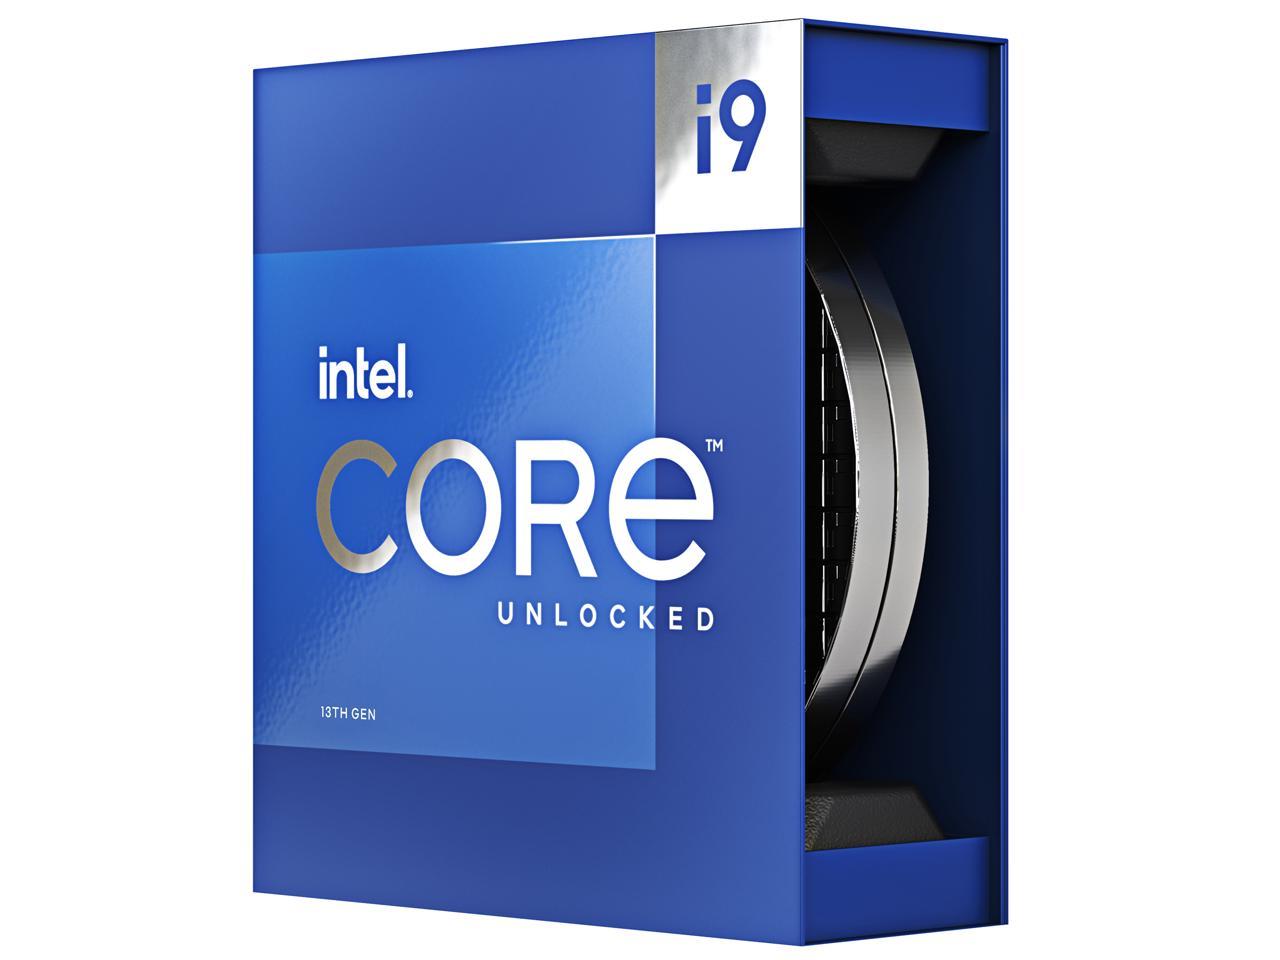  <B>Intel 13th Gen. LGA1700 CPU: Raptor Lake i9-13900K</B><BR>24-Cores (8P-Cores/16E-Cores), 32-Threads, 5.8GHz (Turbo) 36MB Cache, 253W<BR>Intel UHD Graphics 770, No CPU Cooler Included  